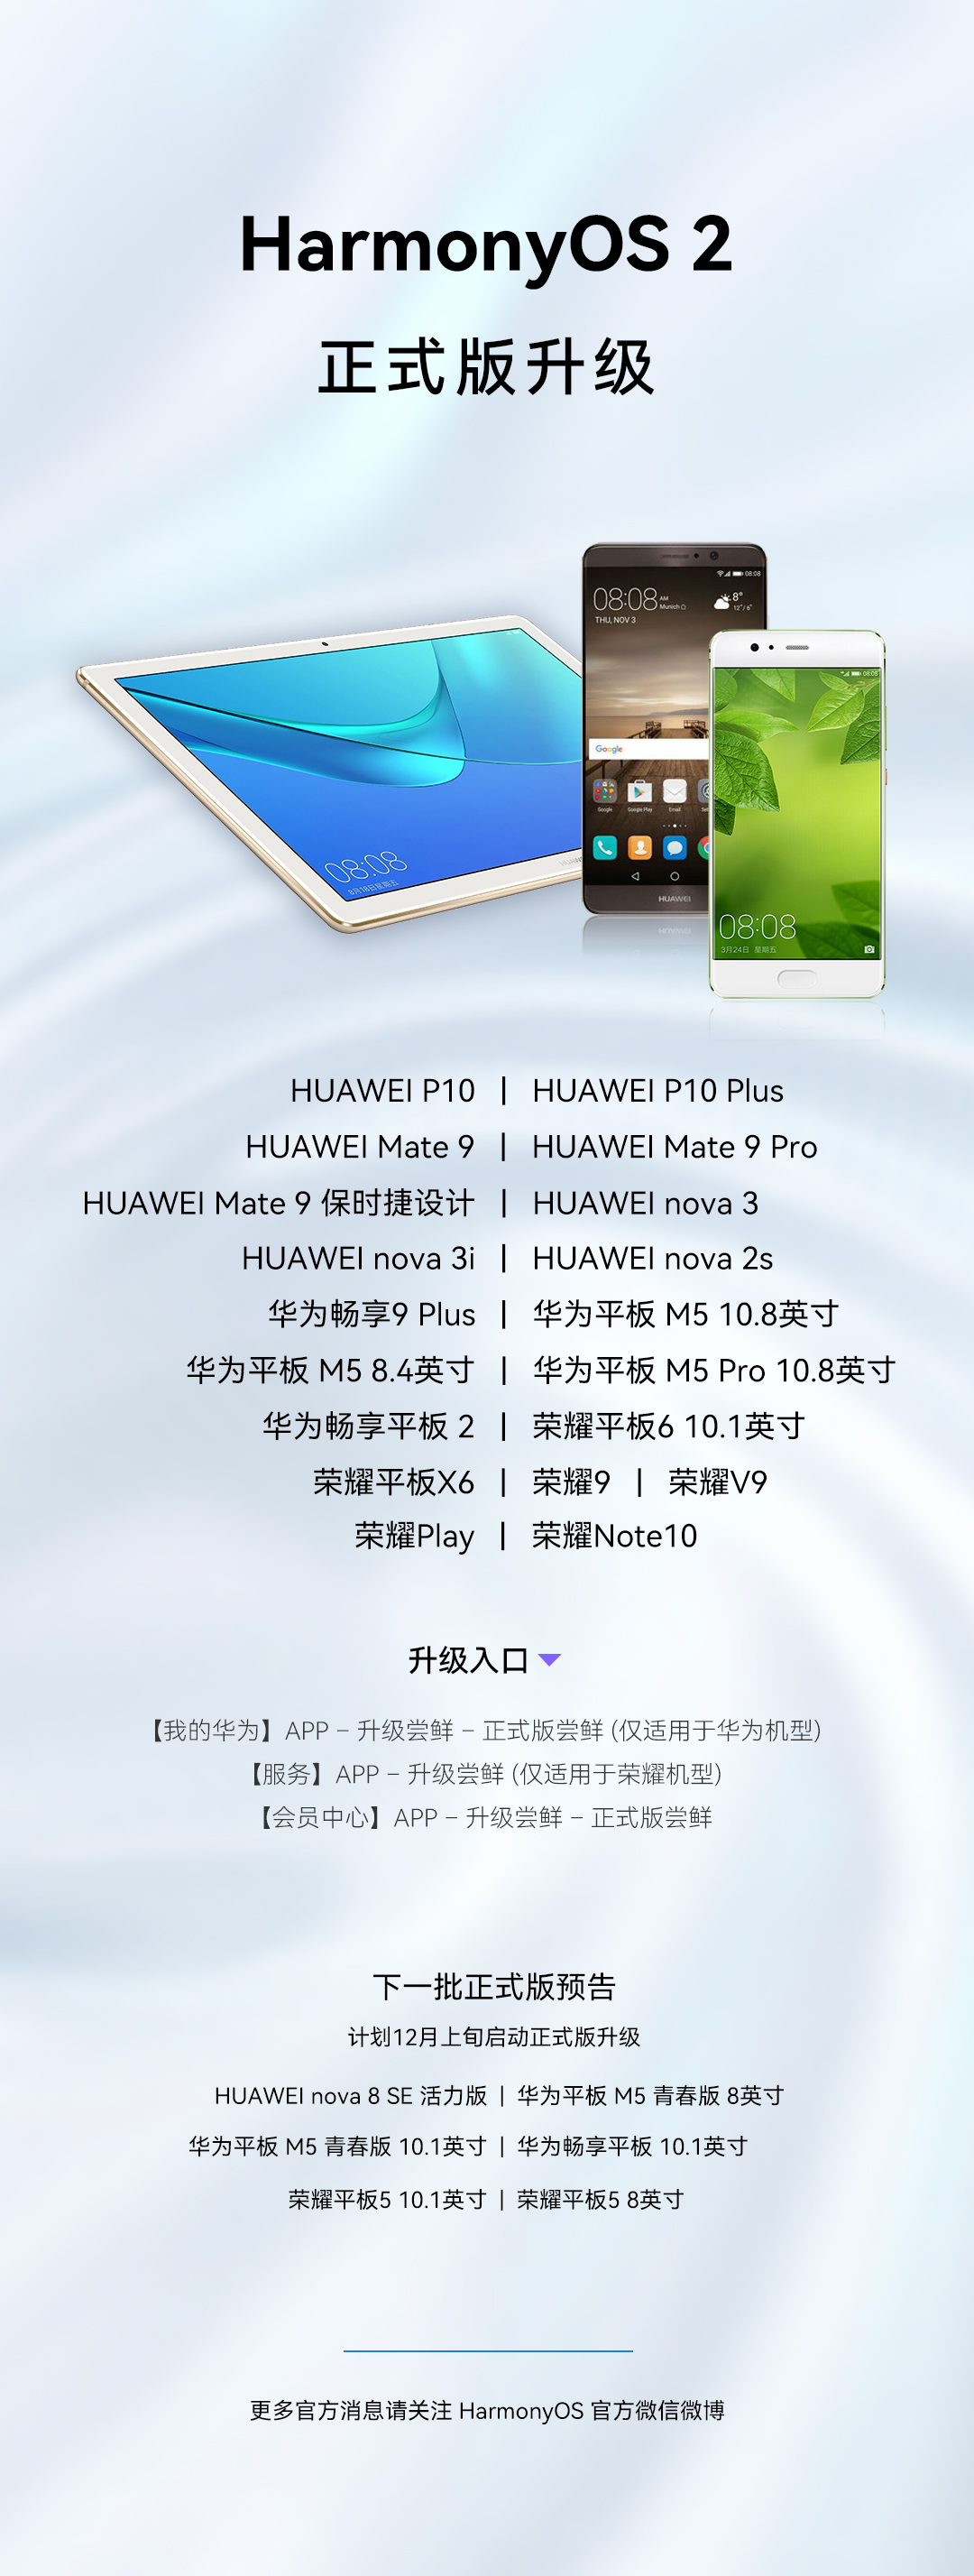 These 19 Huawei devices are getting HarmonyOS 2 stable update